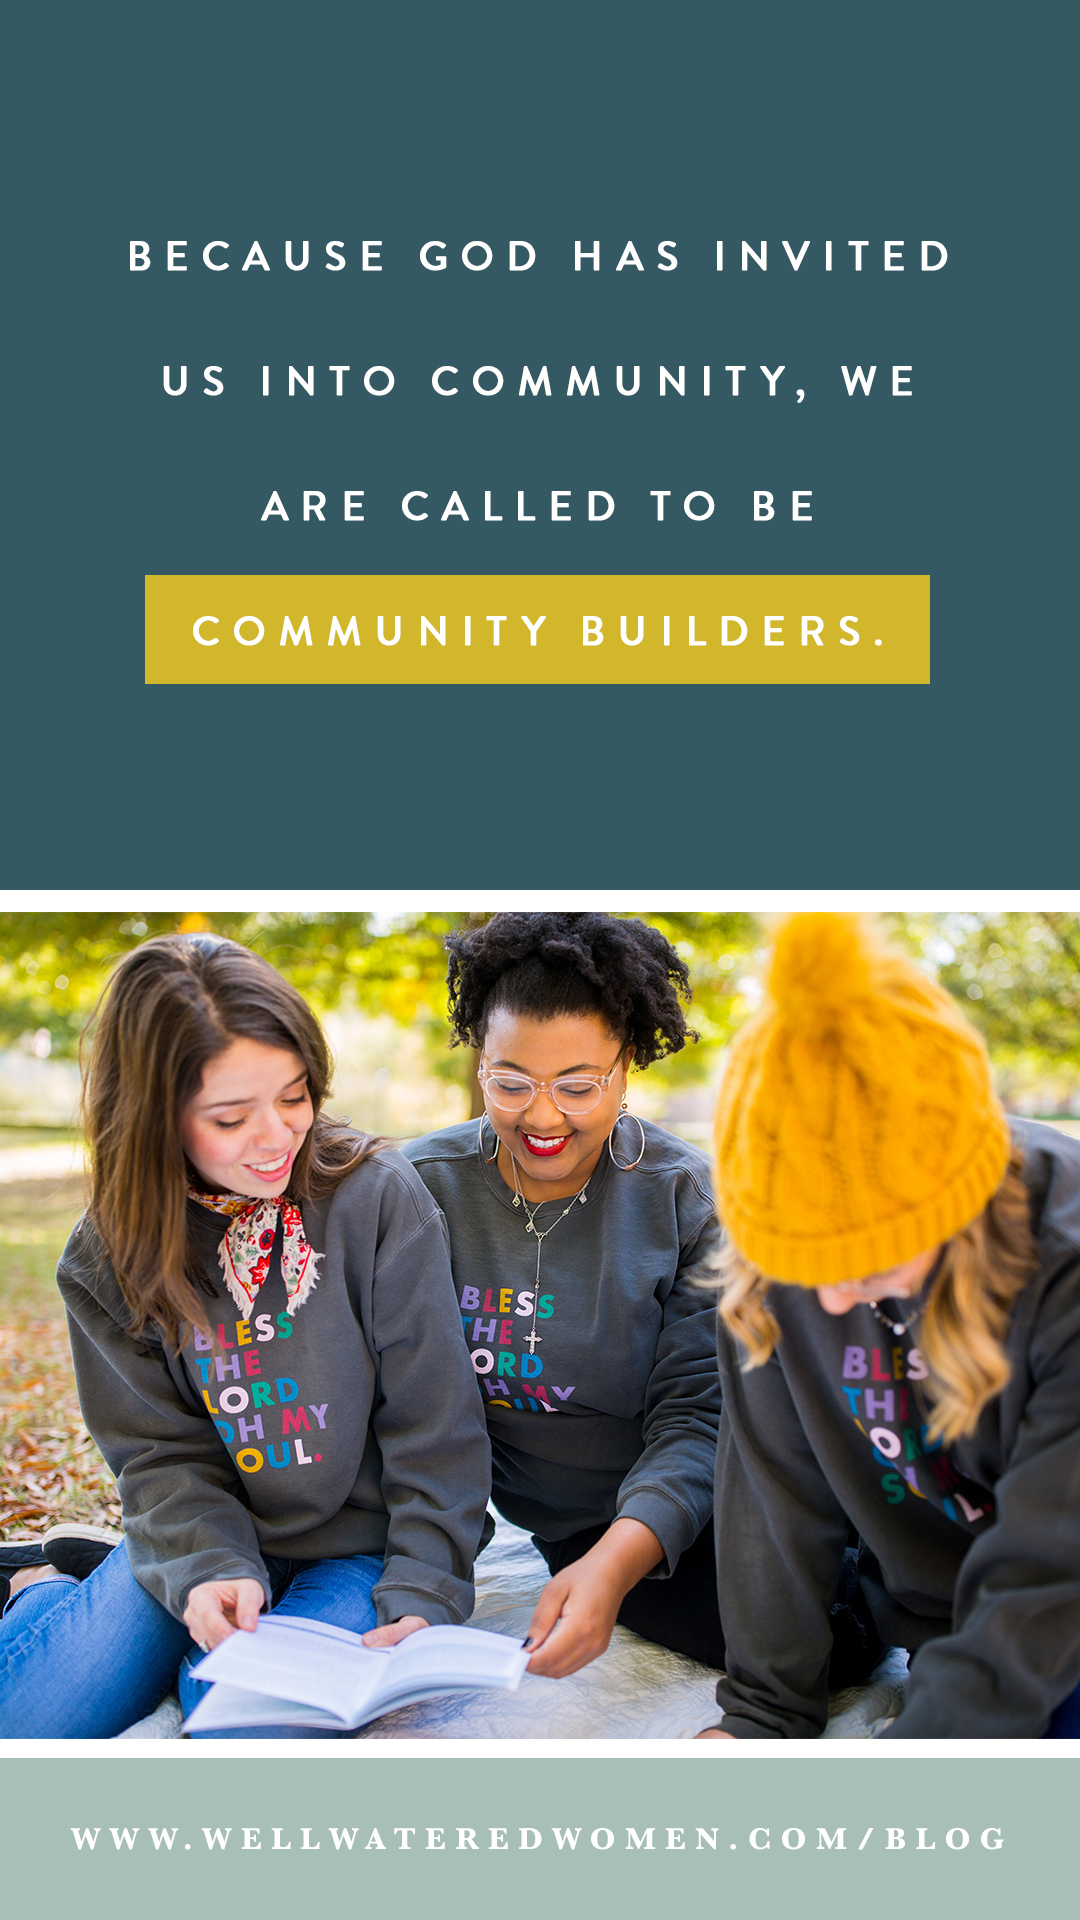 Because God has invited us into community, we are CALLED to be community builders.